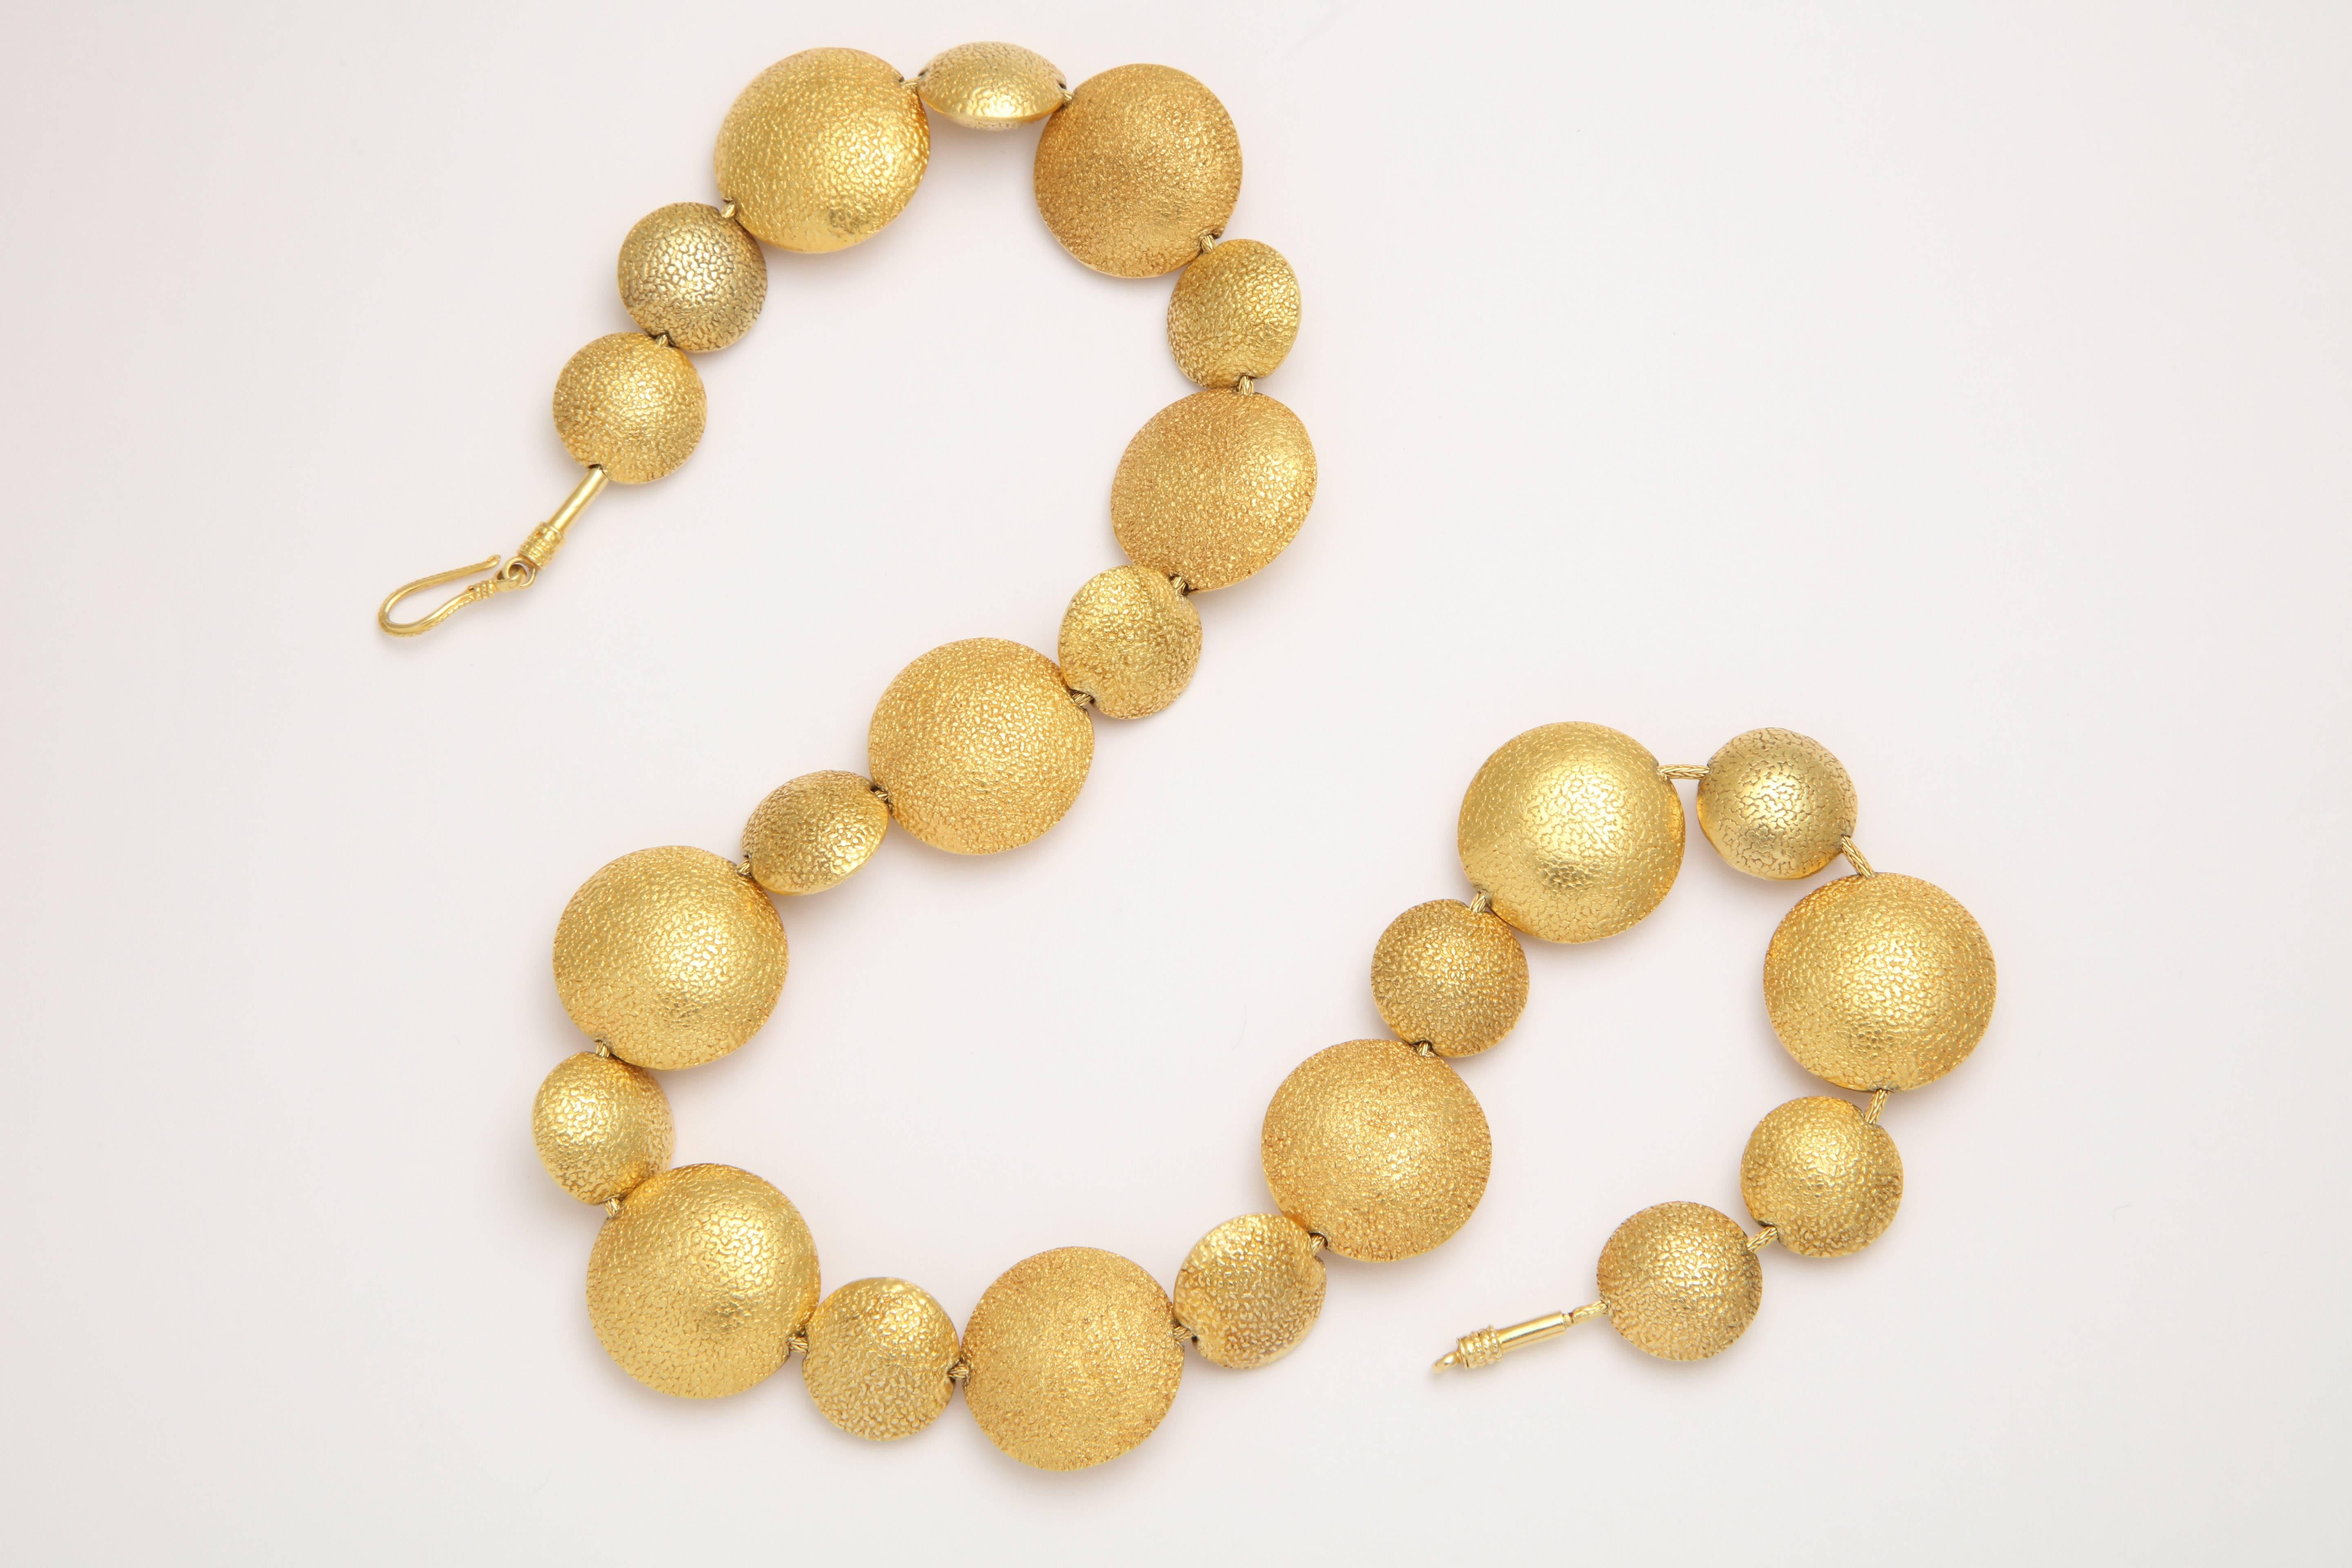 A necklace composed of 23 18kt yellow gold smartie beads. The beads are strung on an 18kt yellow gold snake chain.

Length: 18 inches
width of large bead: 1 inch